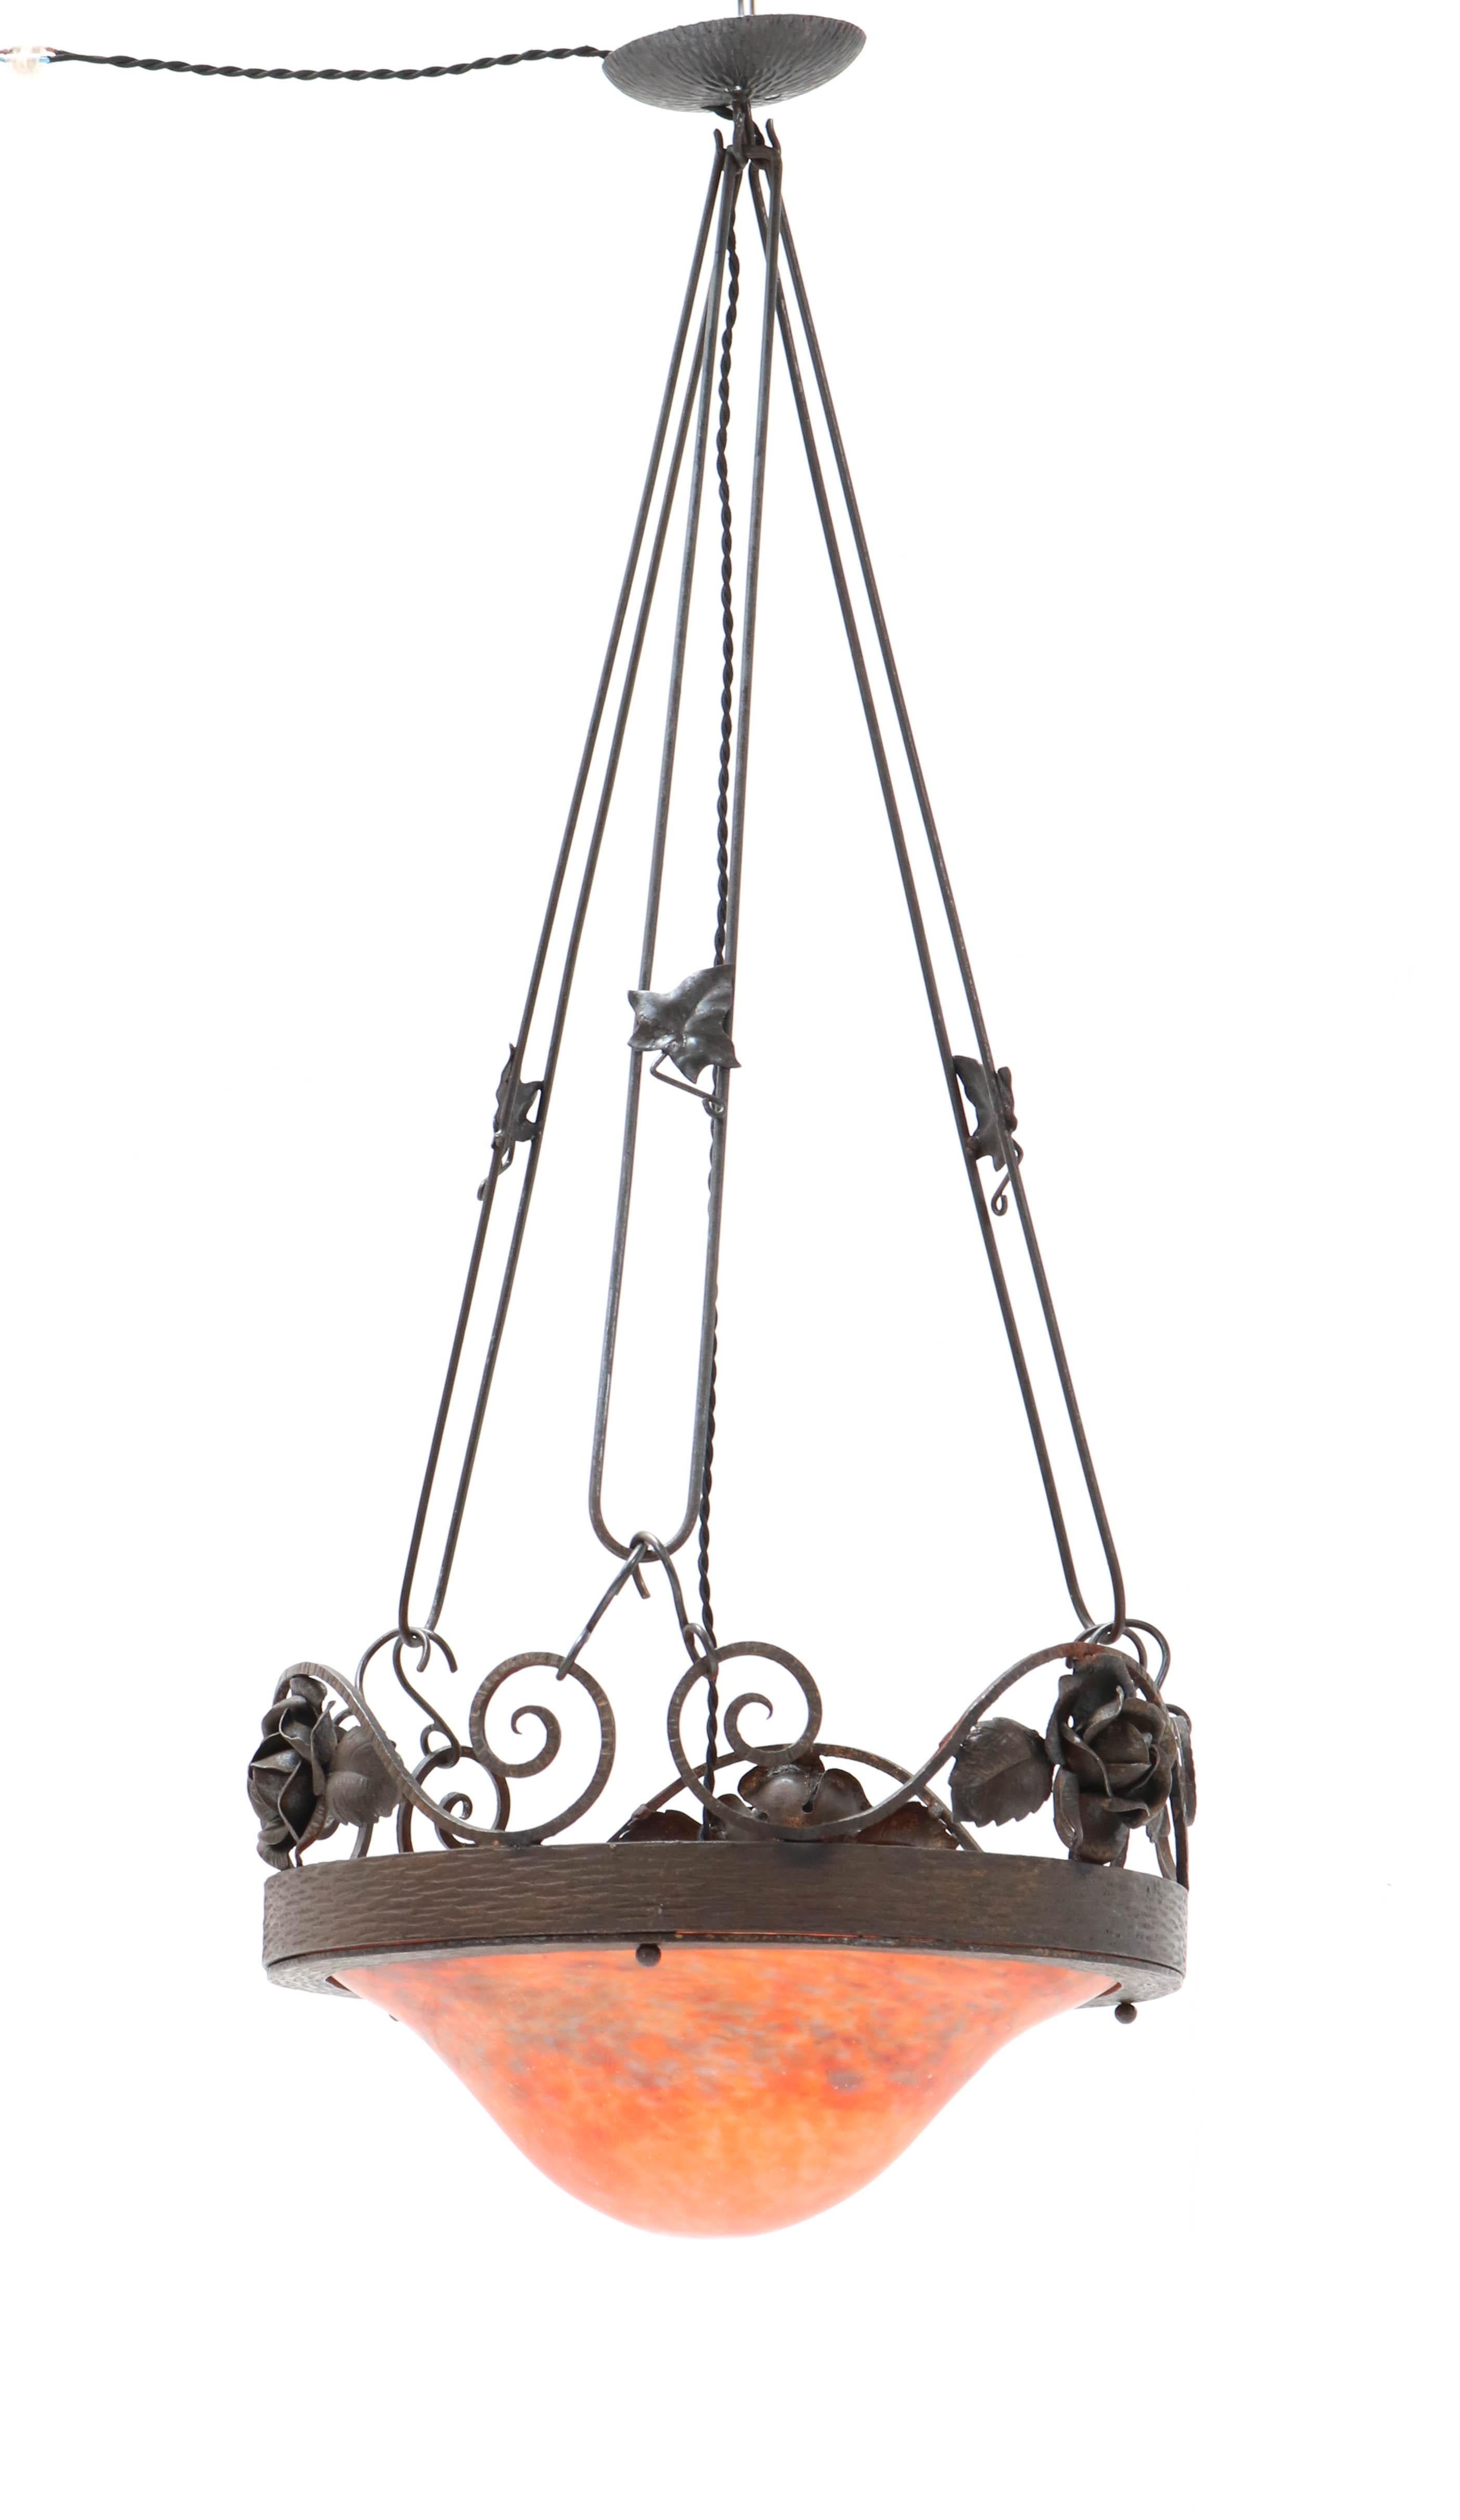 Iron French Art Nouveau Chandelier by Muller Frères Lunéville, 1900s For Sale